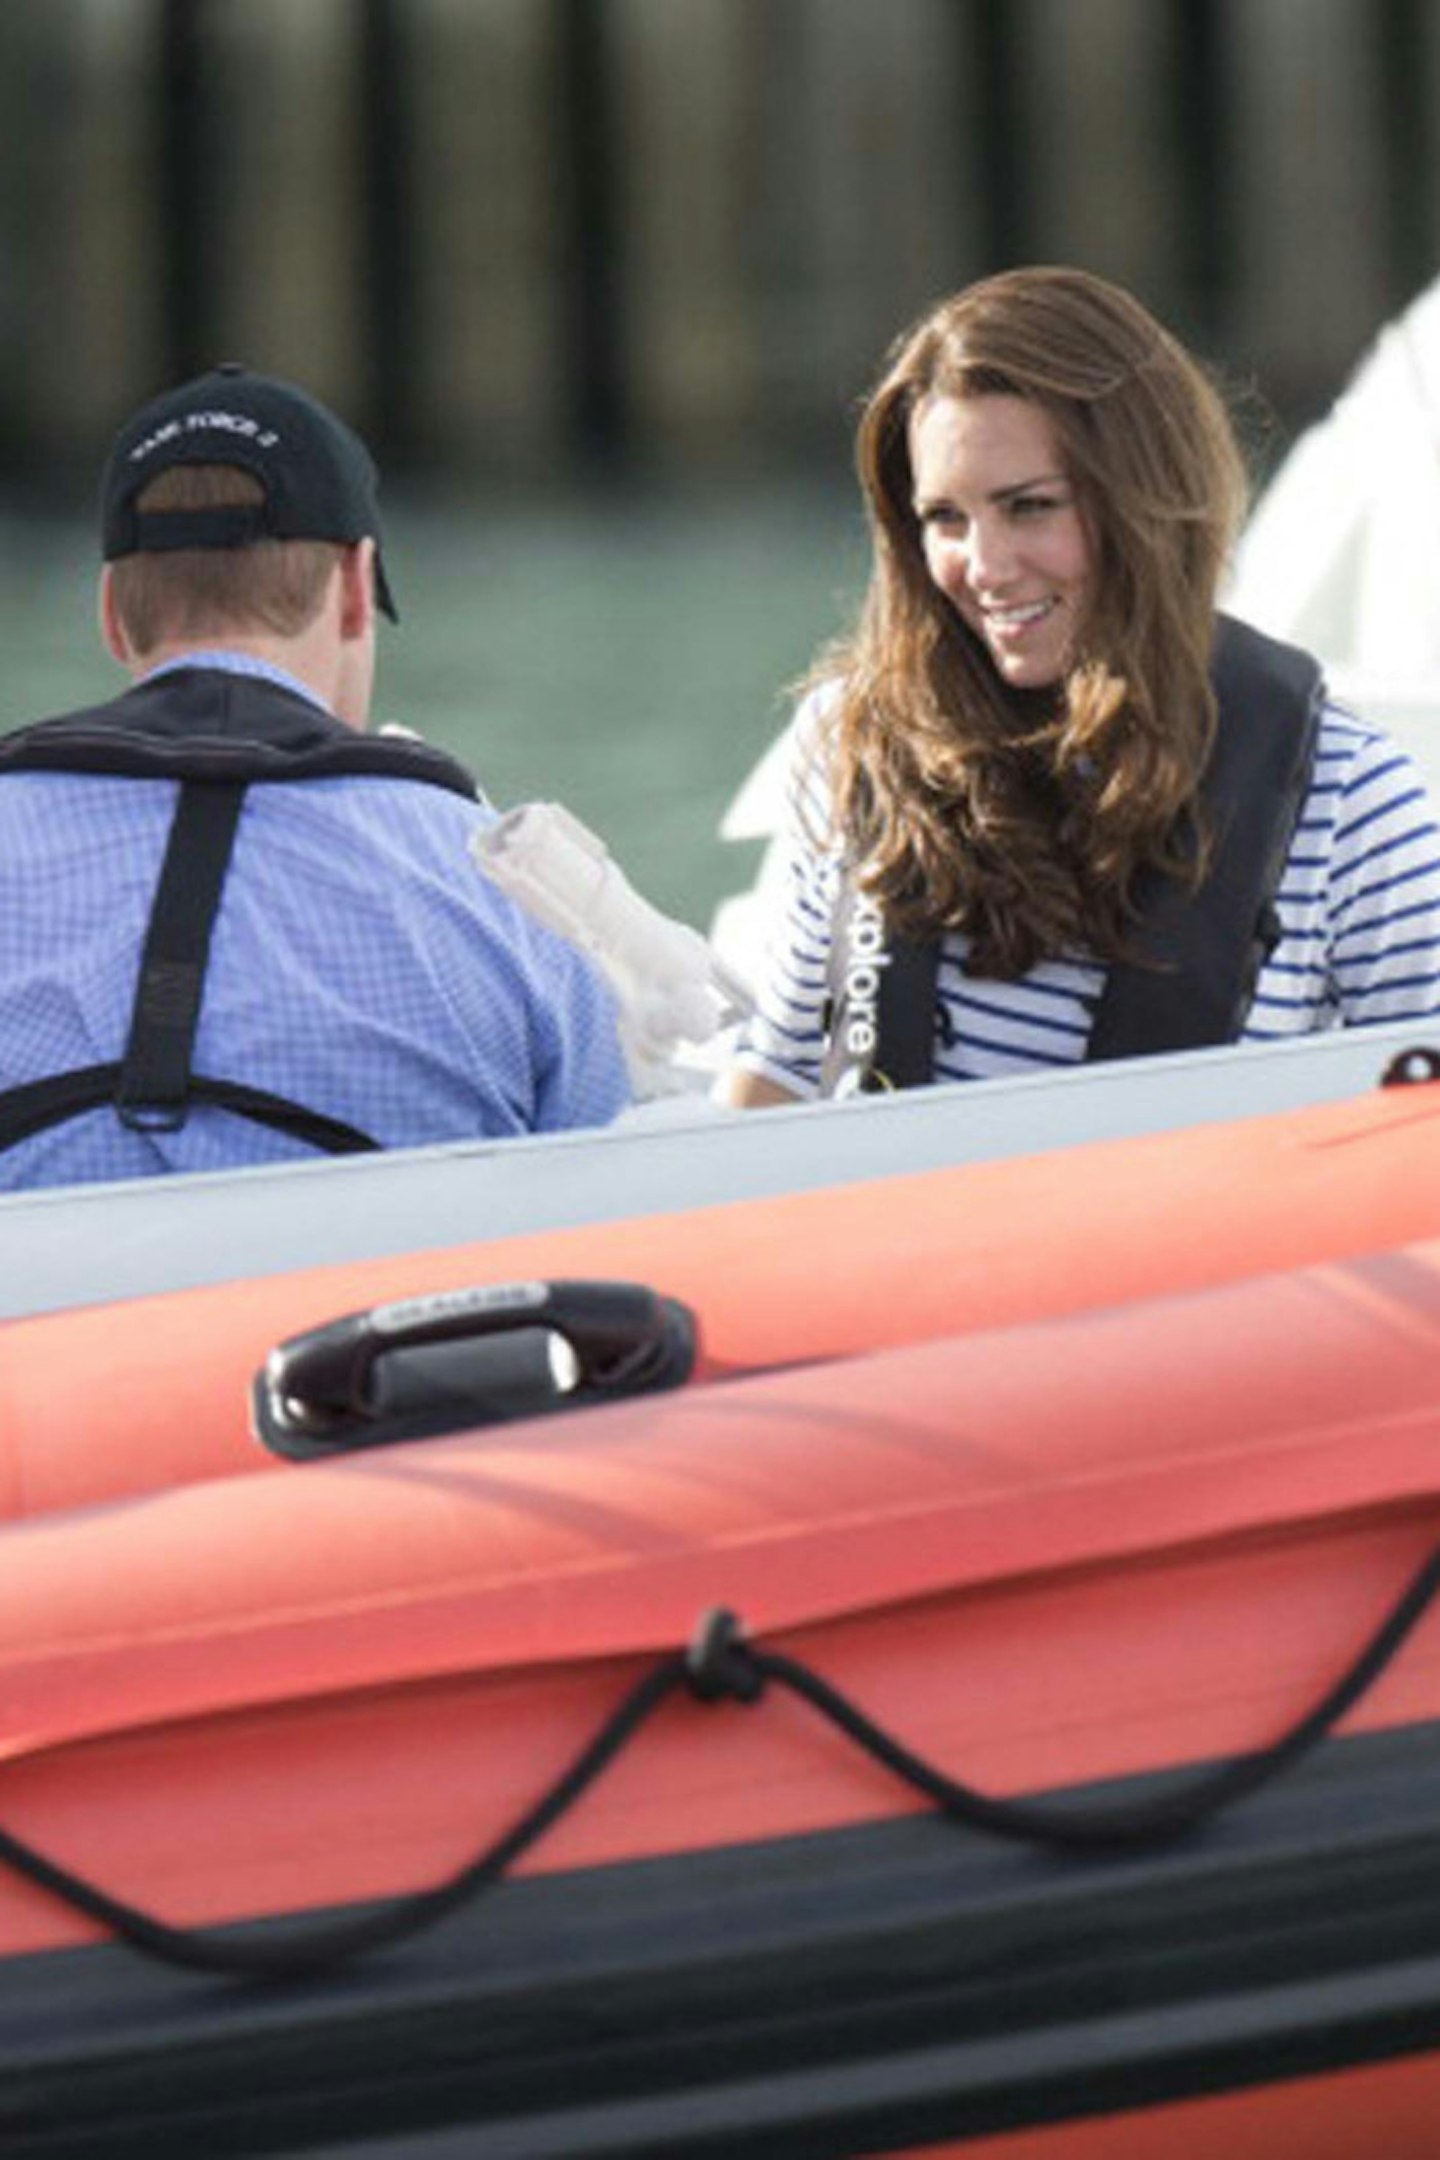 56-55. The royal couple go sailing in Auckland, New Zealand in April 2014